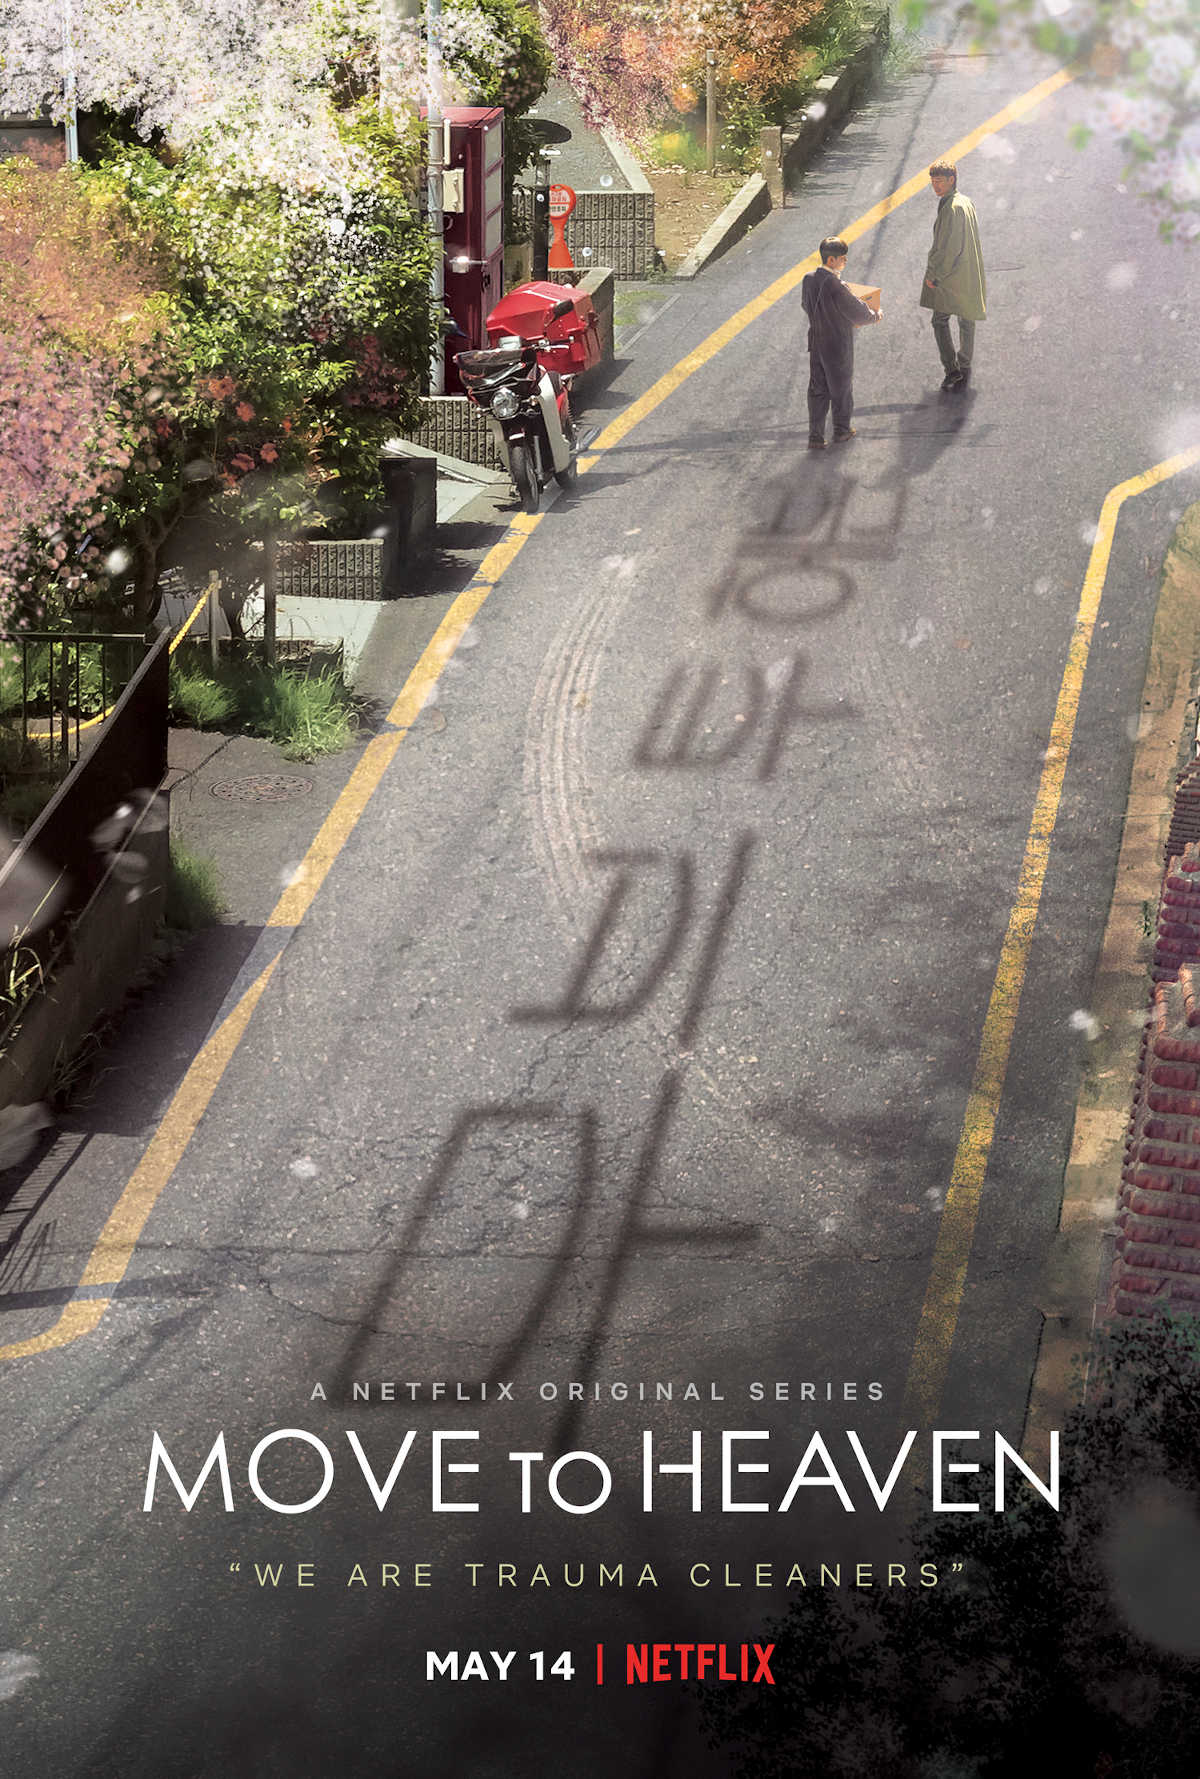 ‘Move To Heaven’ Netflix Original Series Coming on May 14